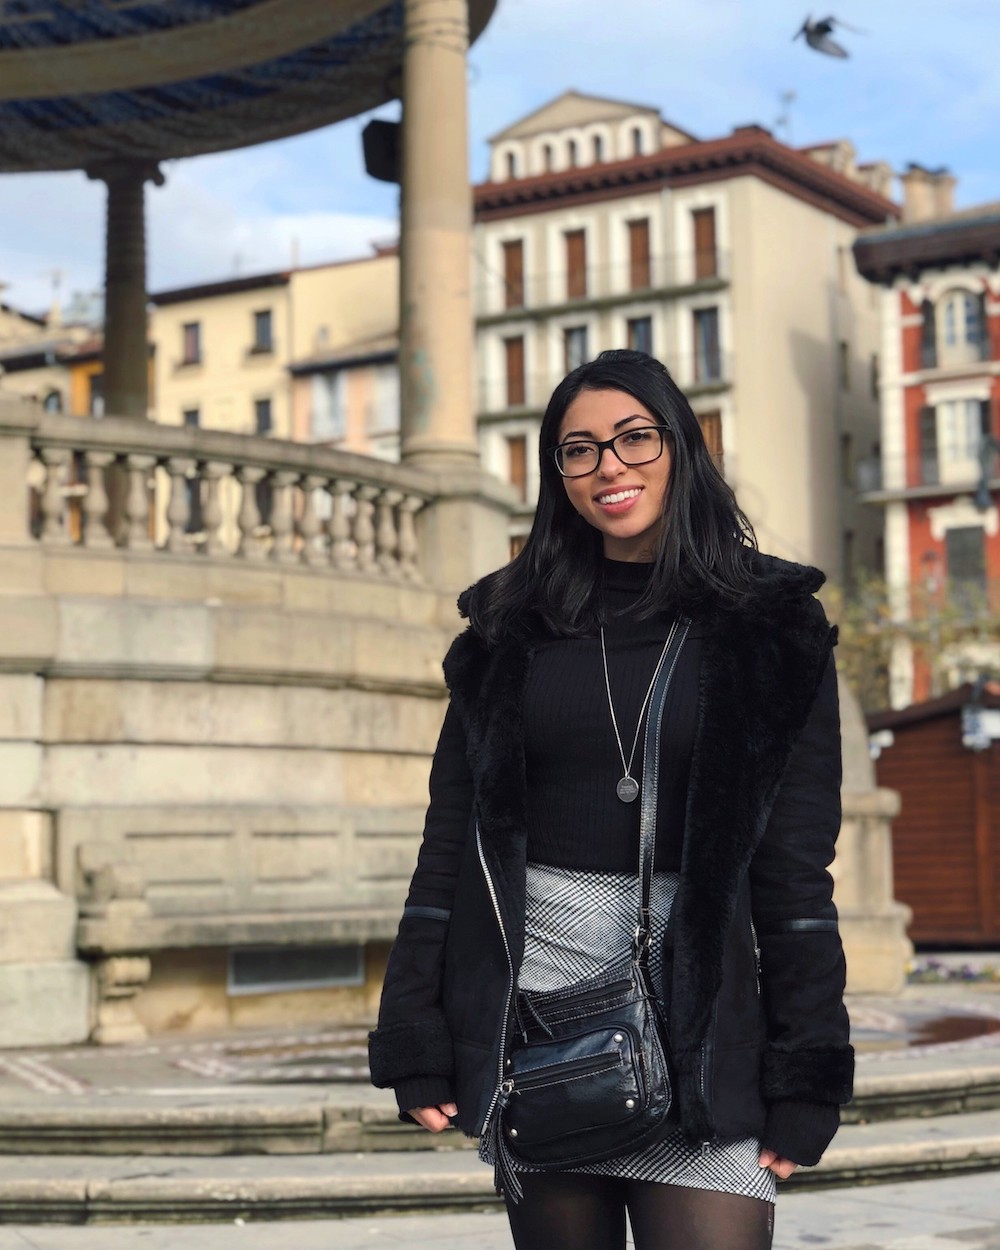 With the help of the UGA College of Agricultural and Environmental Sciences Ratcliffe Scholarship Program, Jacqueline Kessler, a fourth-year environmental economics and management major, took an internship with the Environmental Law Institute remotely while participating in an exchange program in Pamplona, Spain.